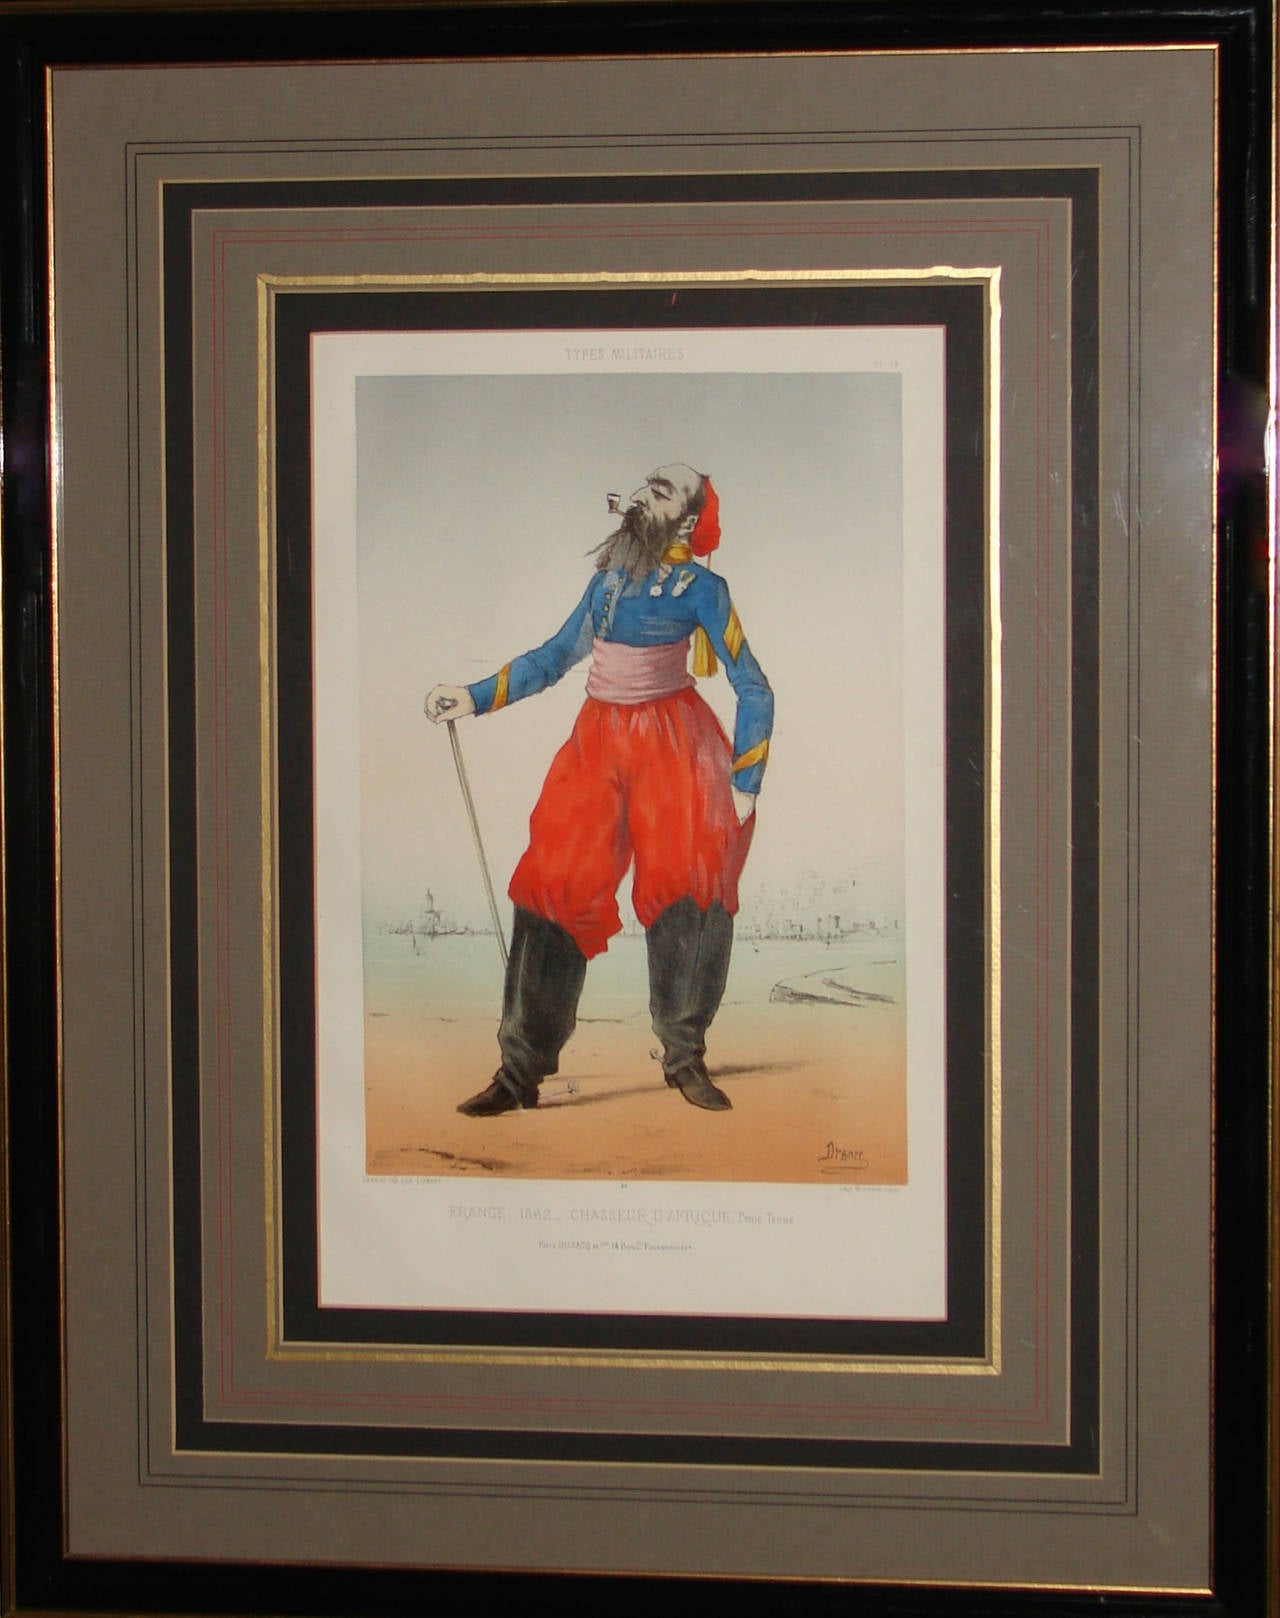 An amusing set of four Belgian matted, framed and glazed colored lithographic caricatures after Jules J. G. Renard, (known as Draner), depicting officers from France, Belgium, Austria and Italy, circa 1870.